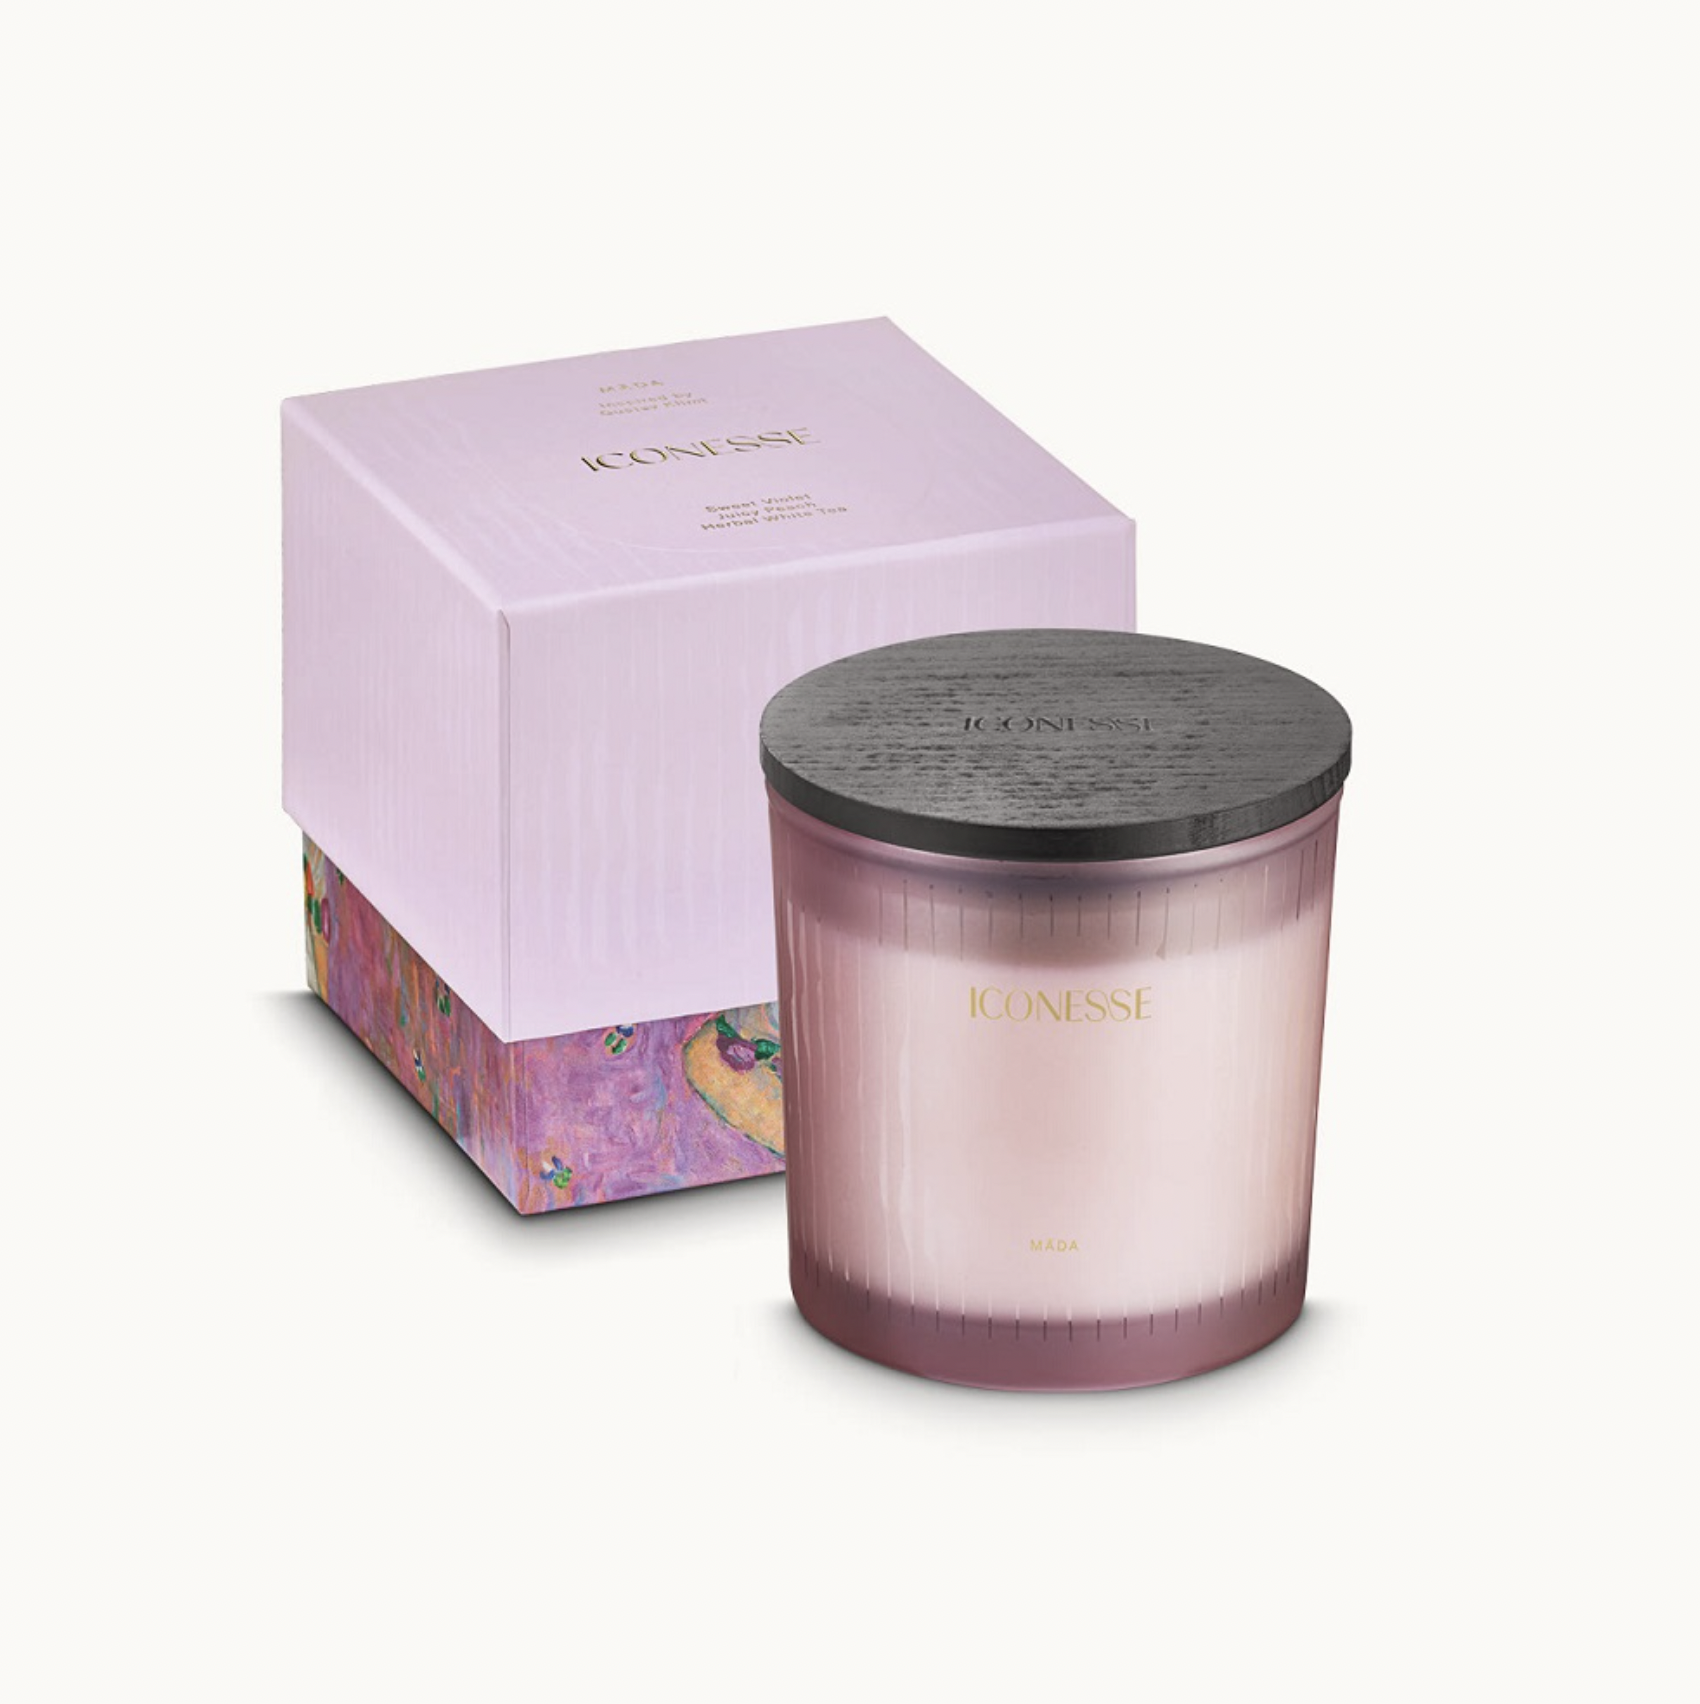 ICONESSE MADA SCENTED CANDLE